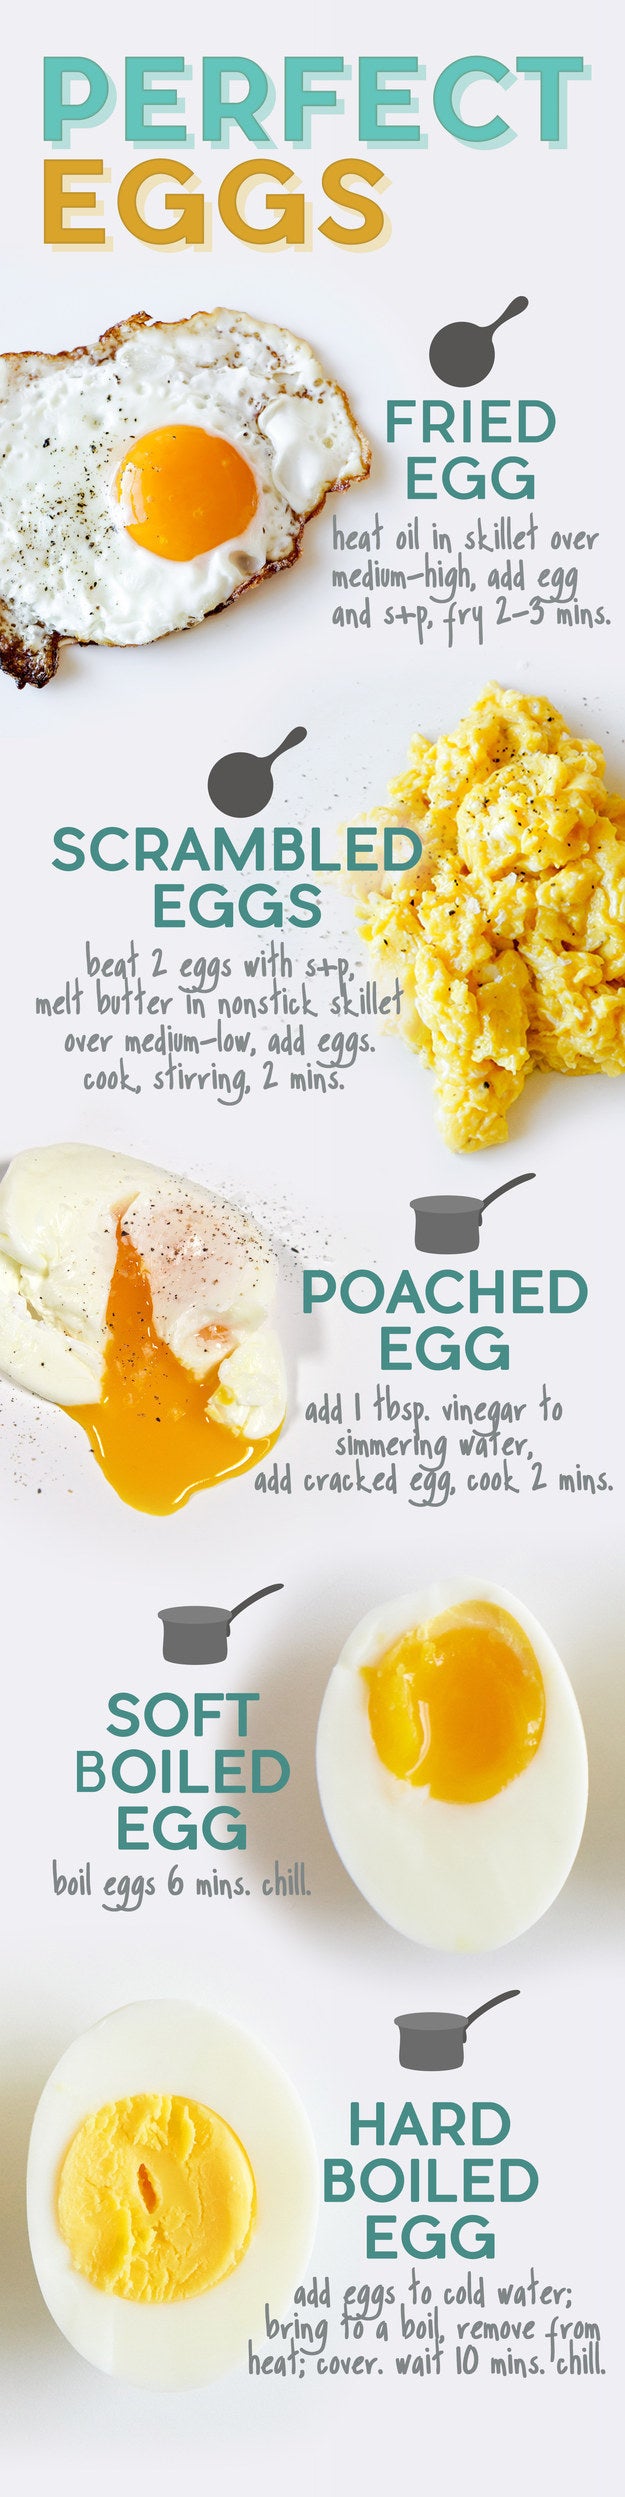 What Is the Healthiest Way to Cook and Eat Eggs?